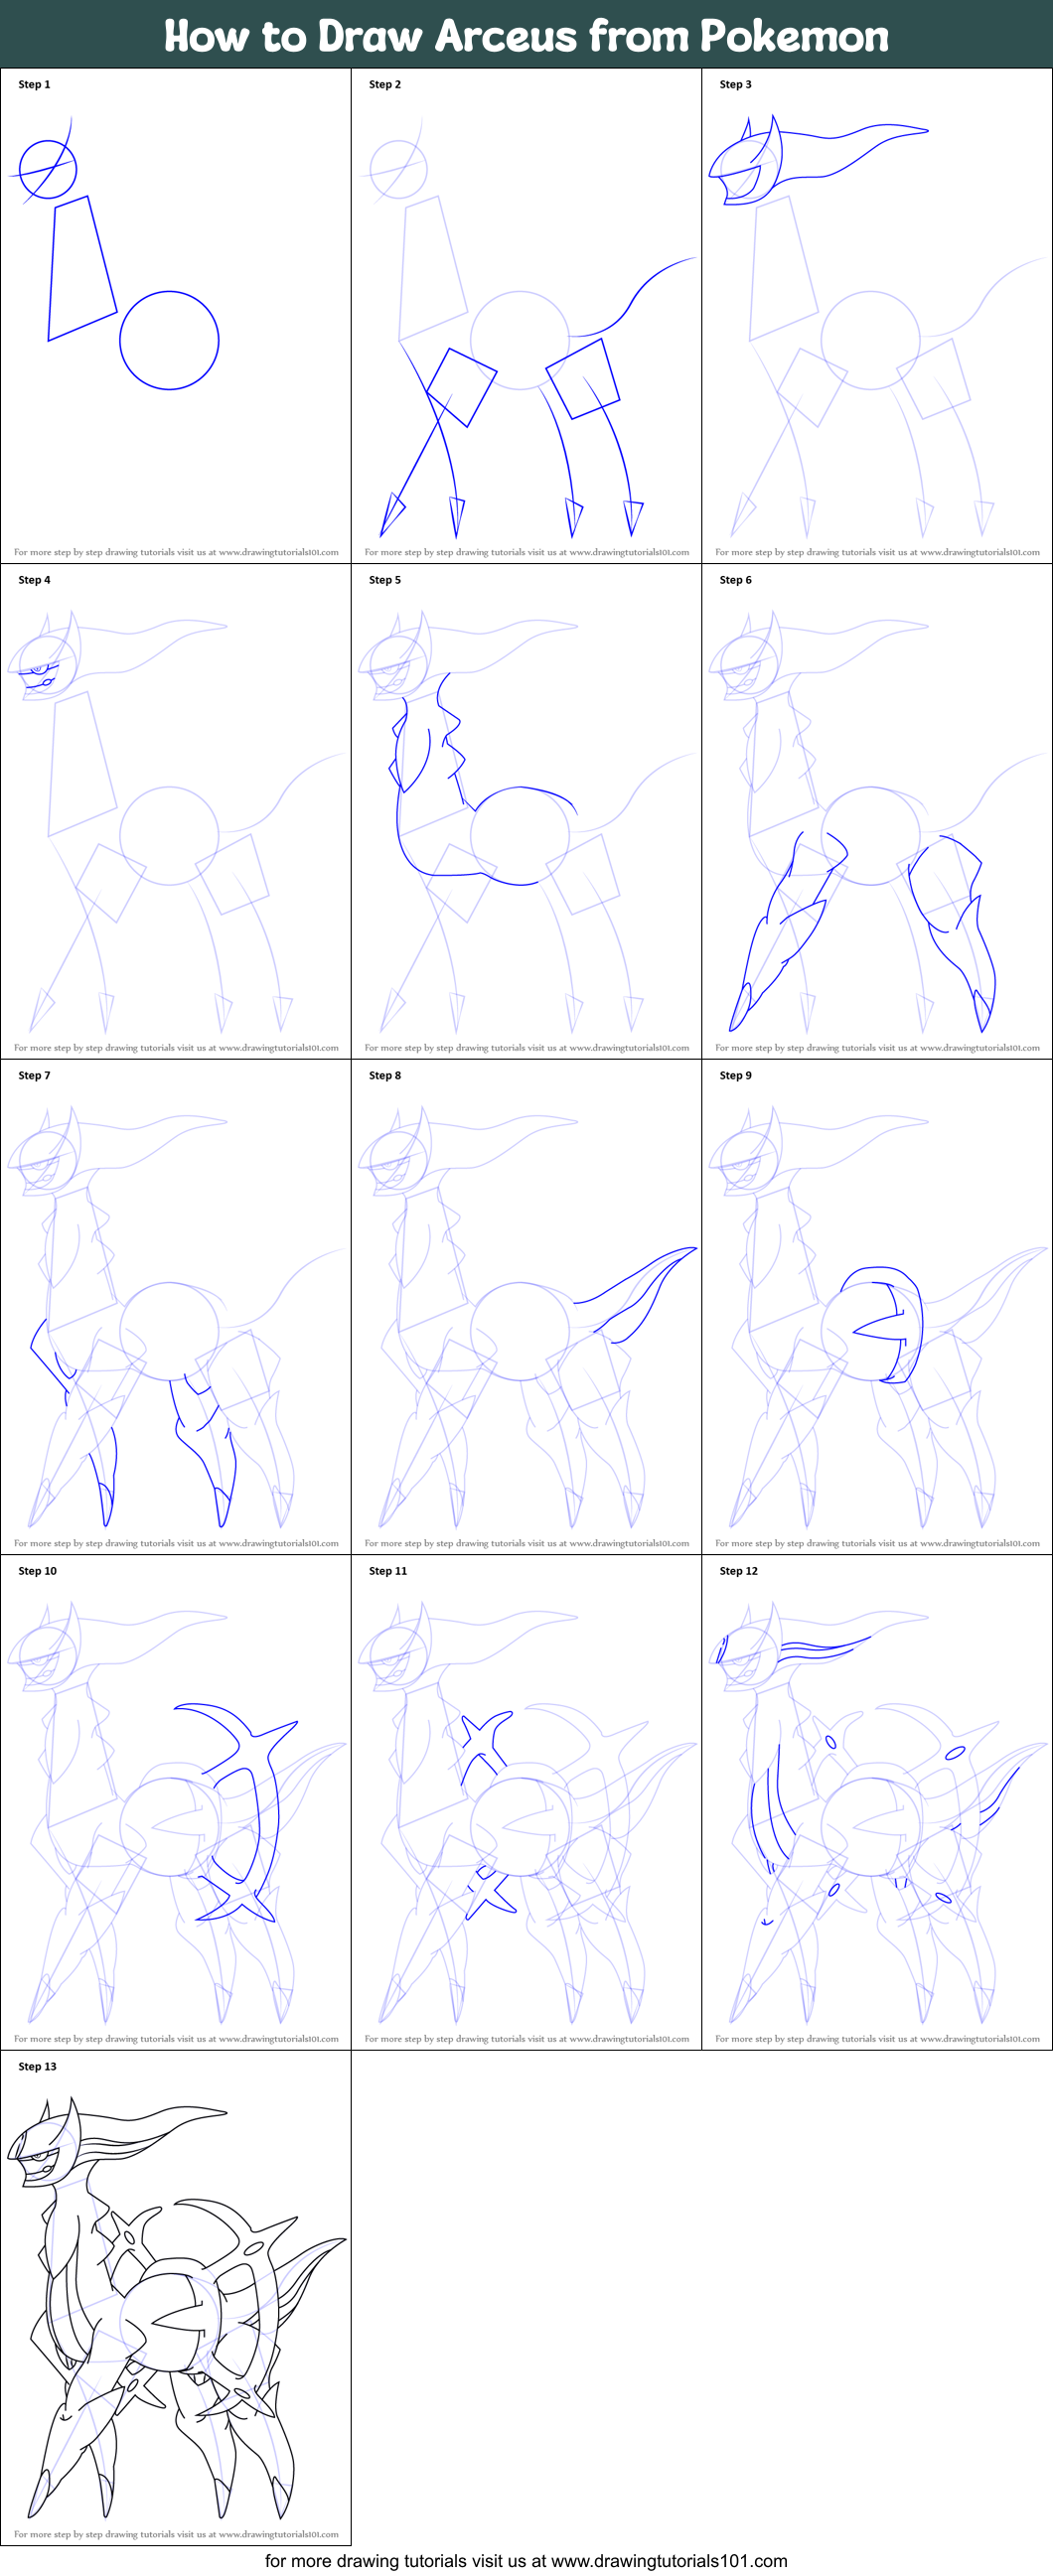 How to Draw Arceus from Pokemon printable step by step drawing sheet